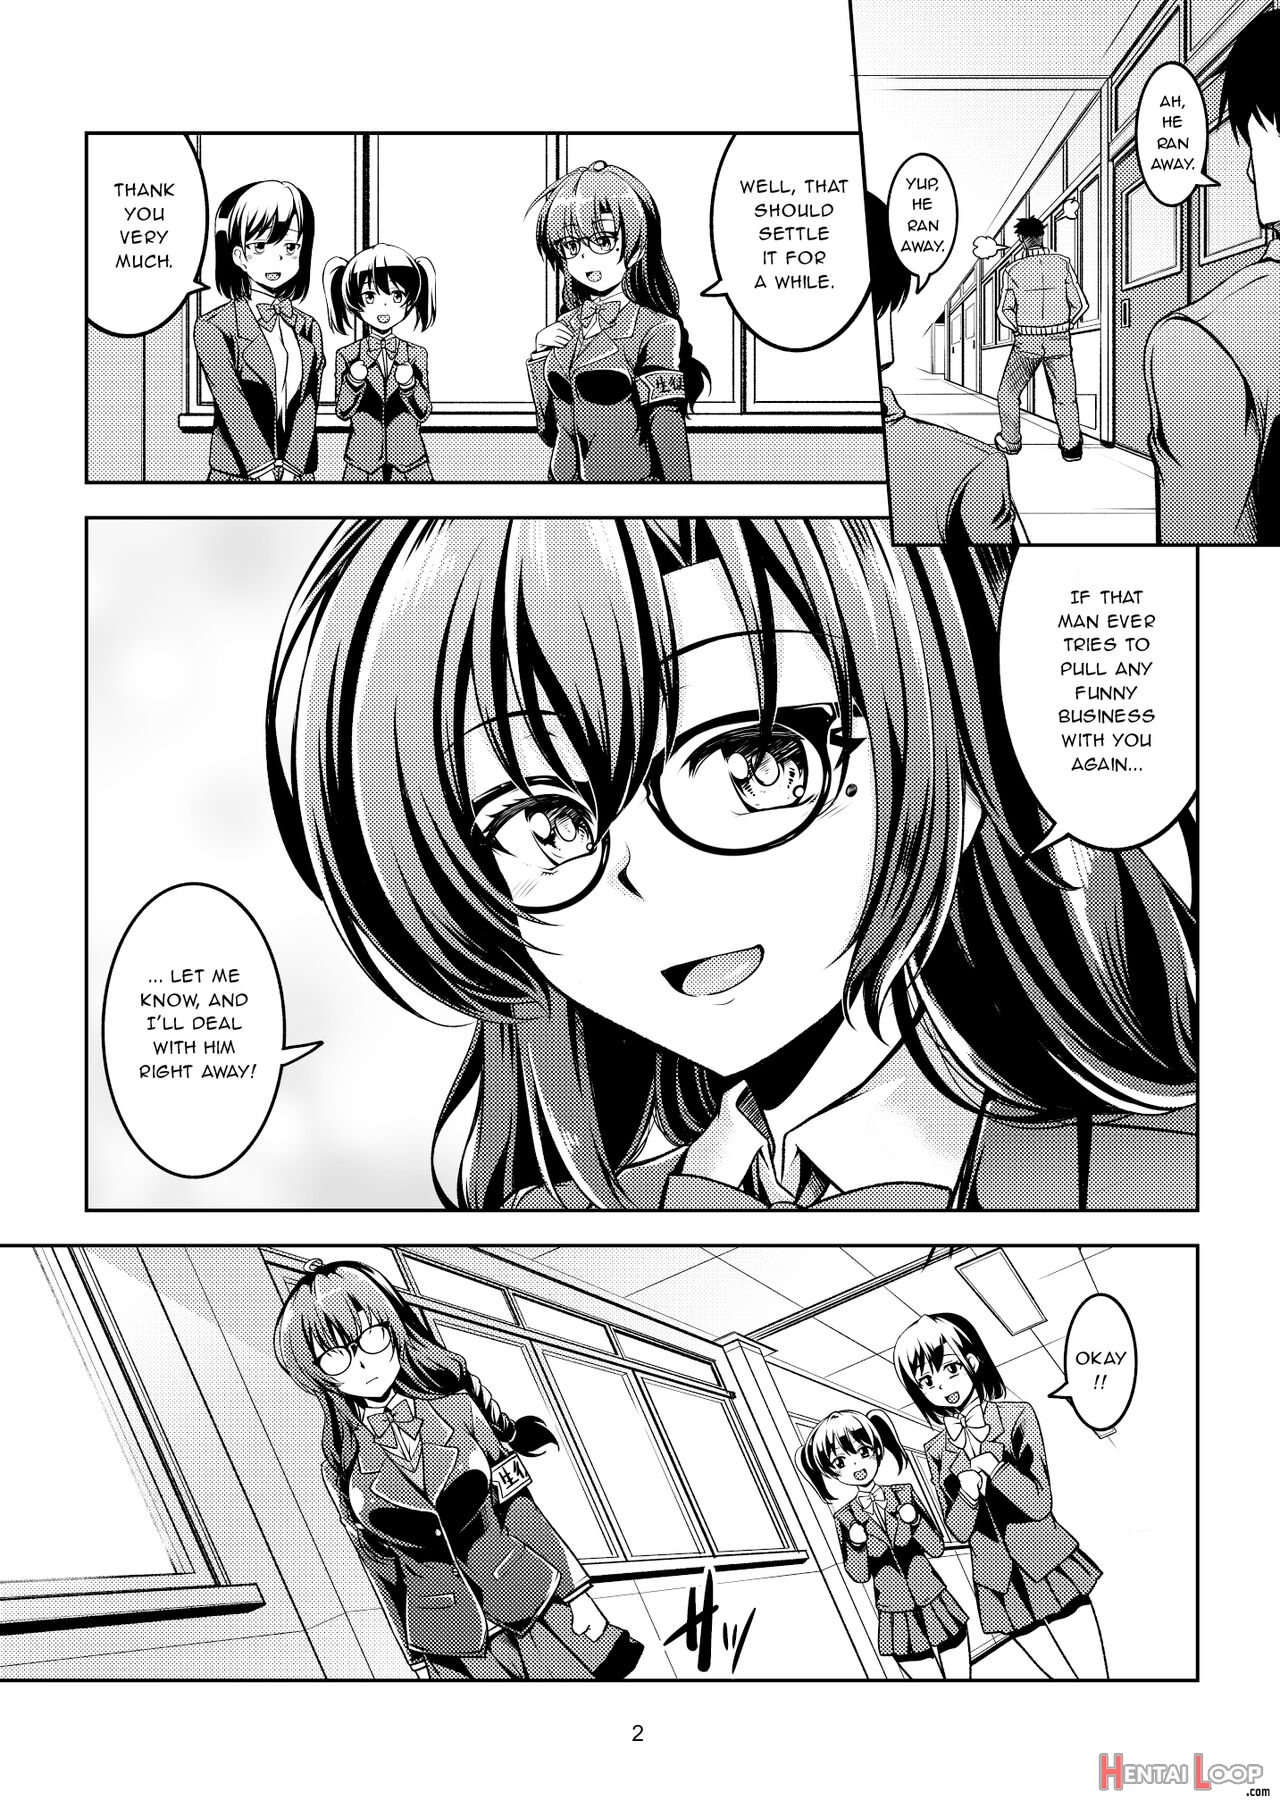 Darkside Streamer Take 1 Blackmail! The Fall Of The Anal Maniac Student Council President -yukino Kanami- page 6